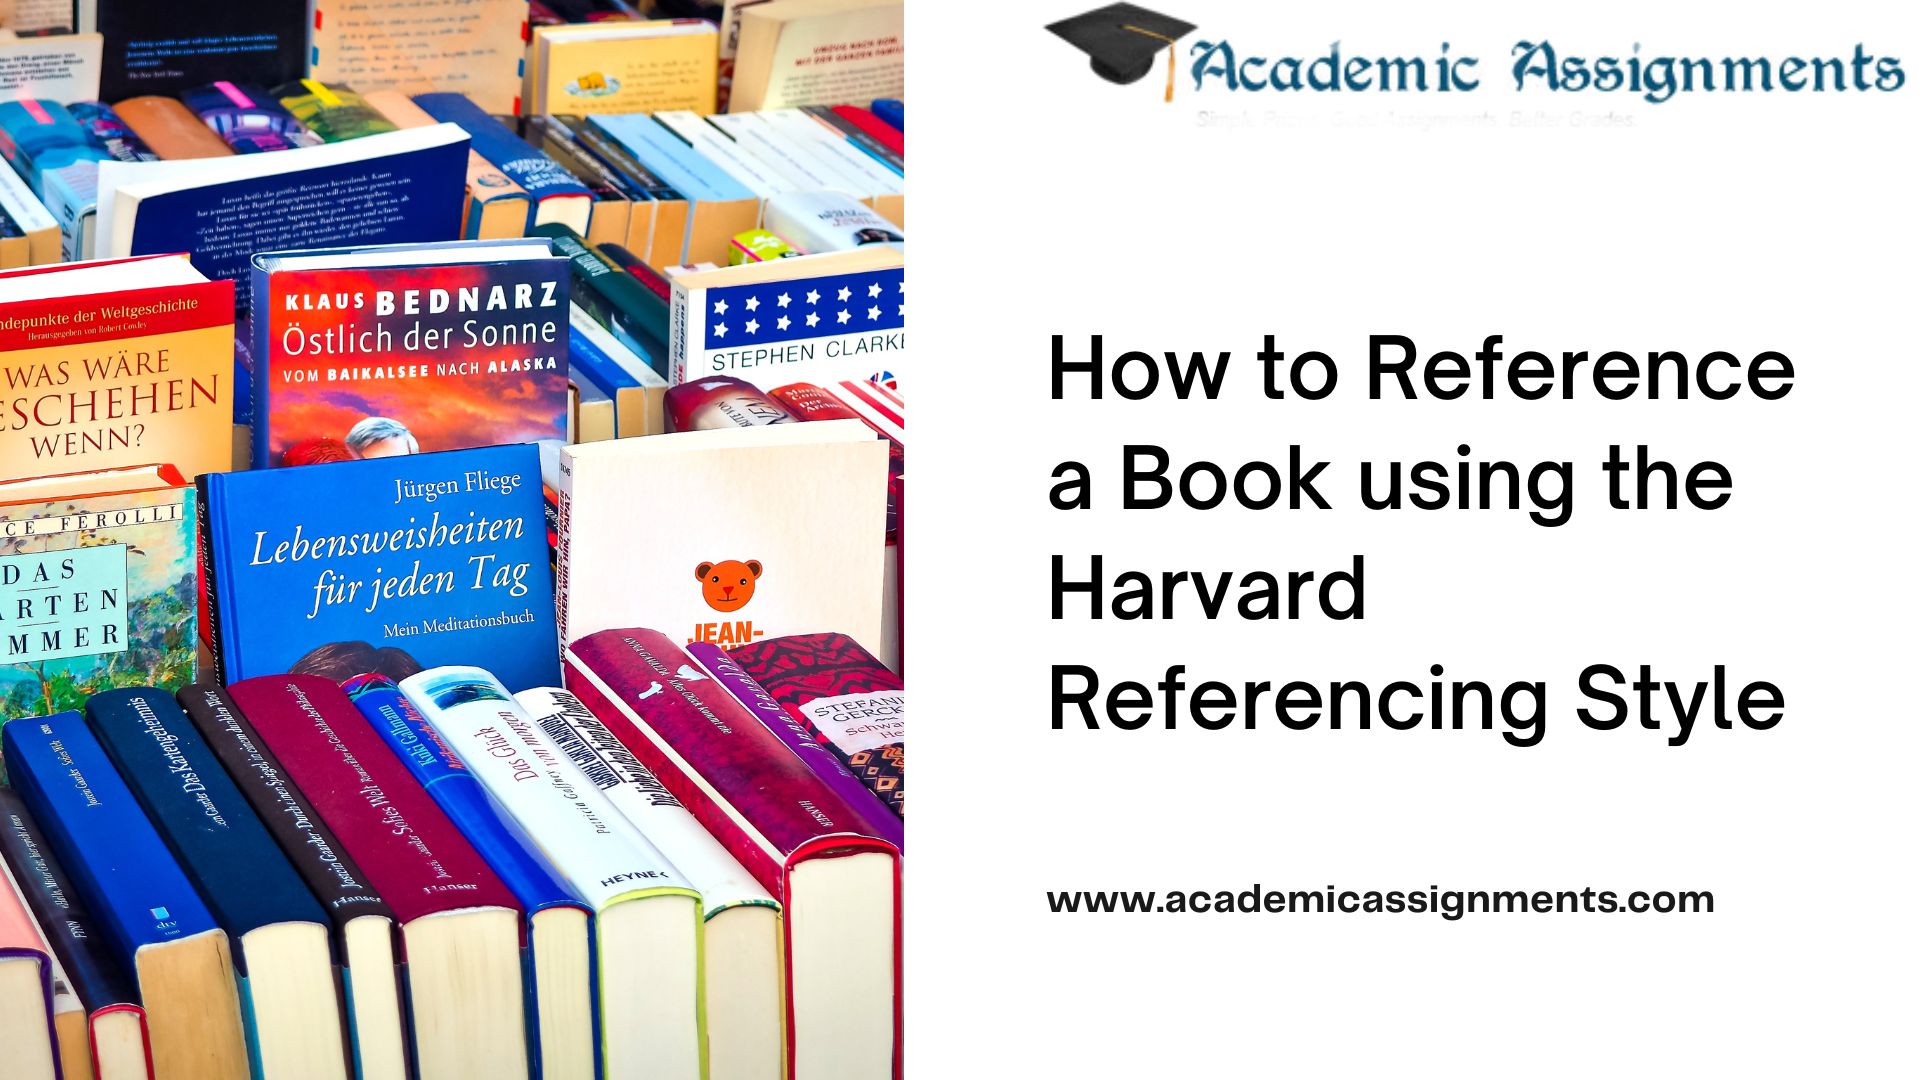 How to Reference a Book using the Harvard Referencing Style